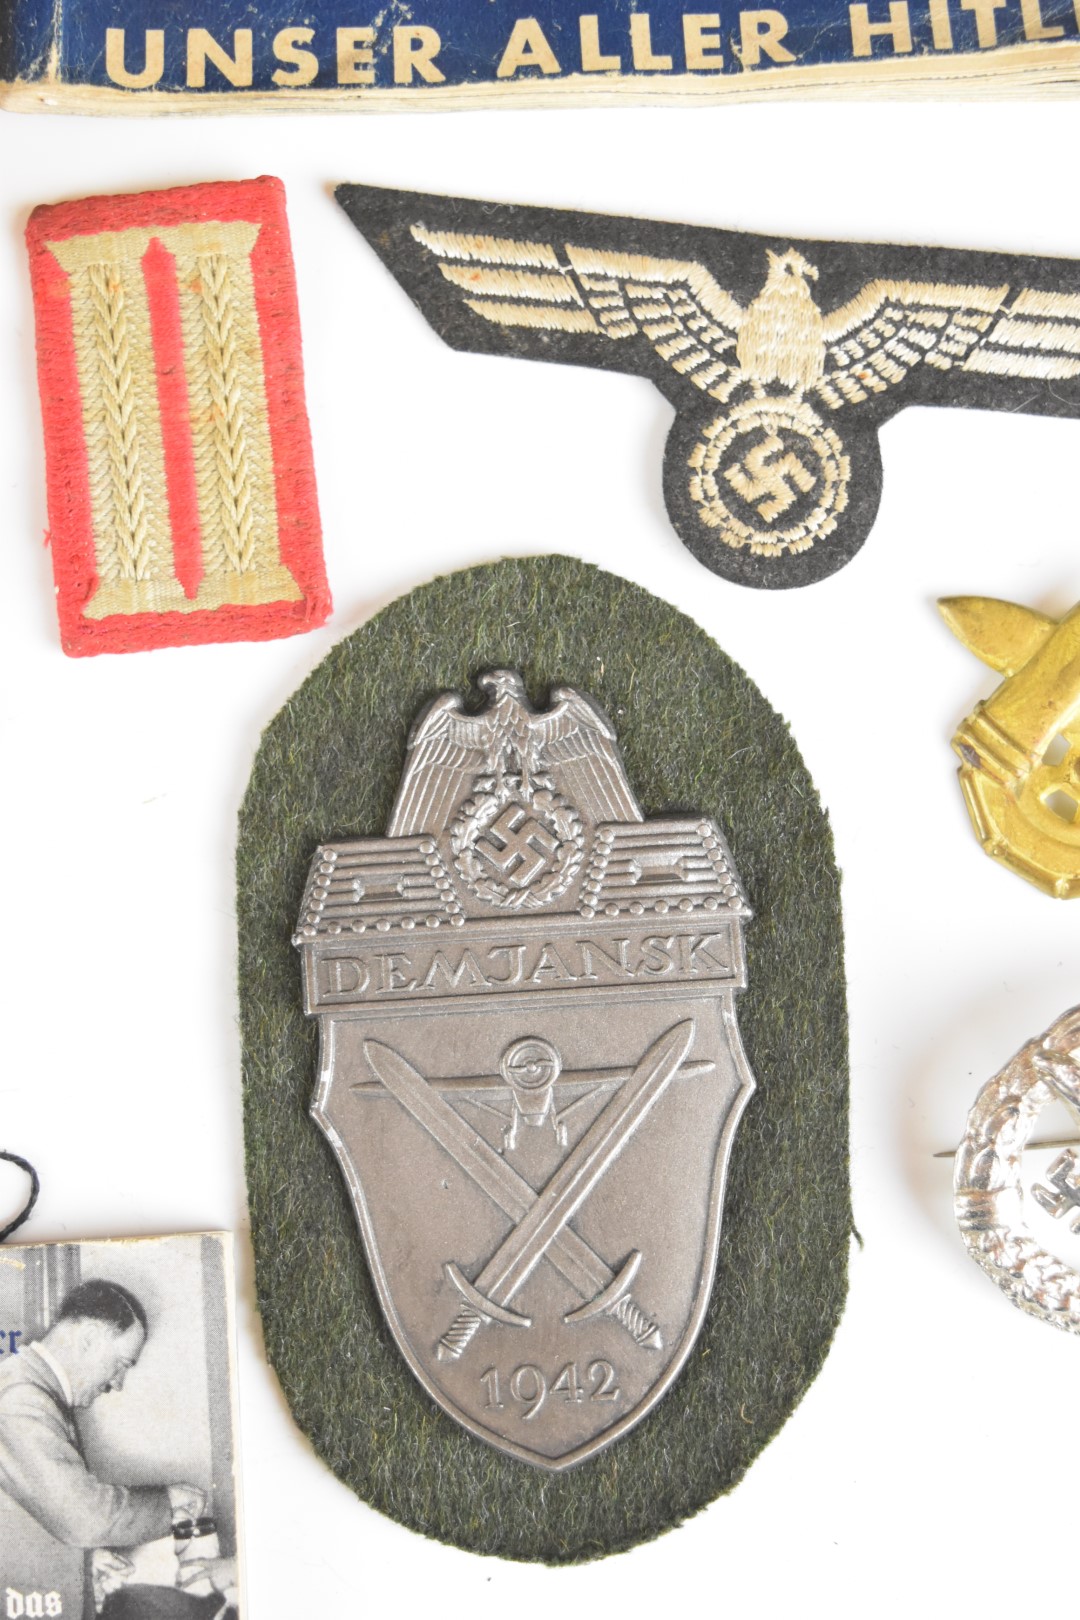 Mainly reproduction German WW2 Nazi insignia, booklets etc - Image 12 of 16